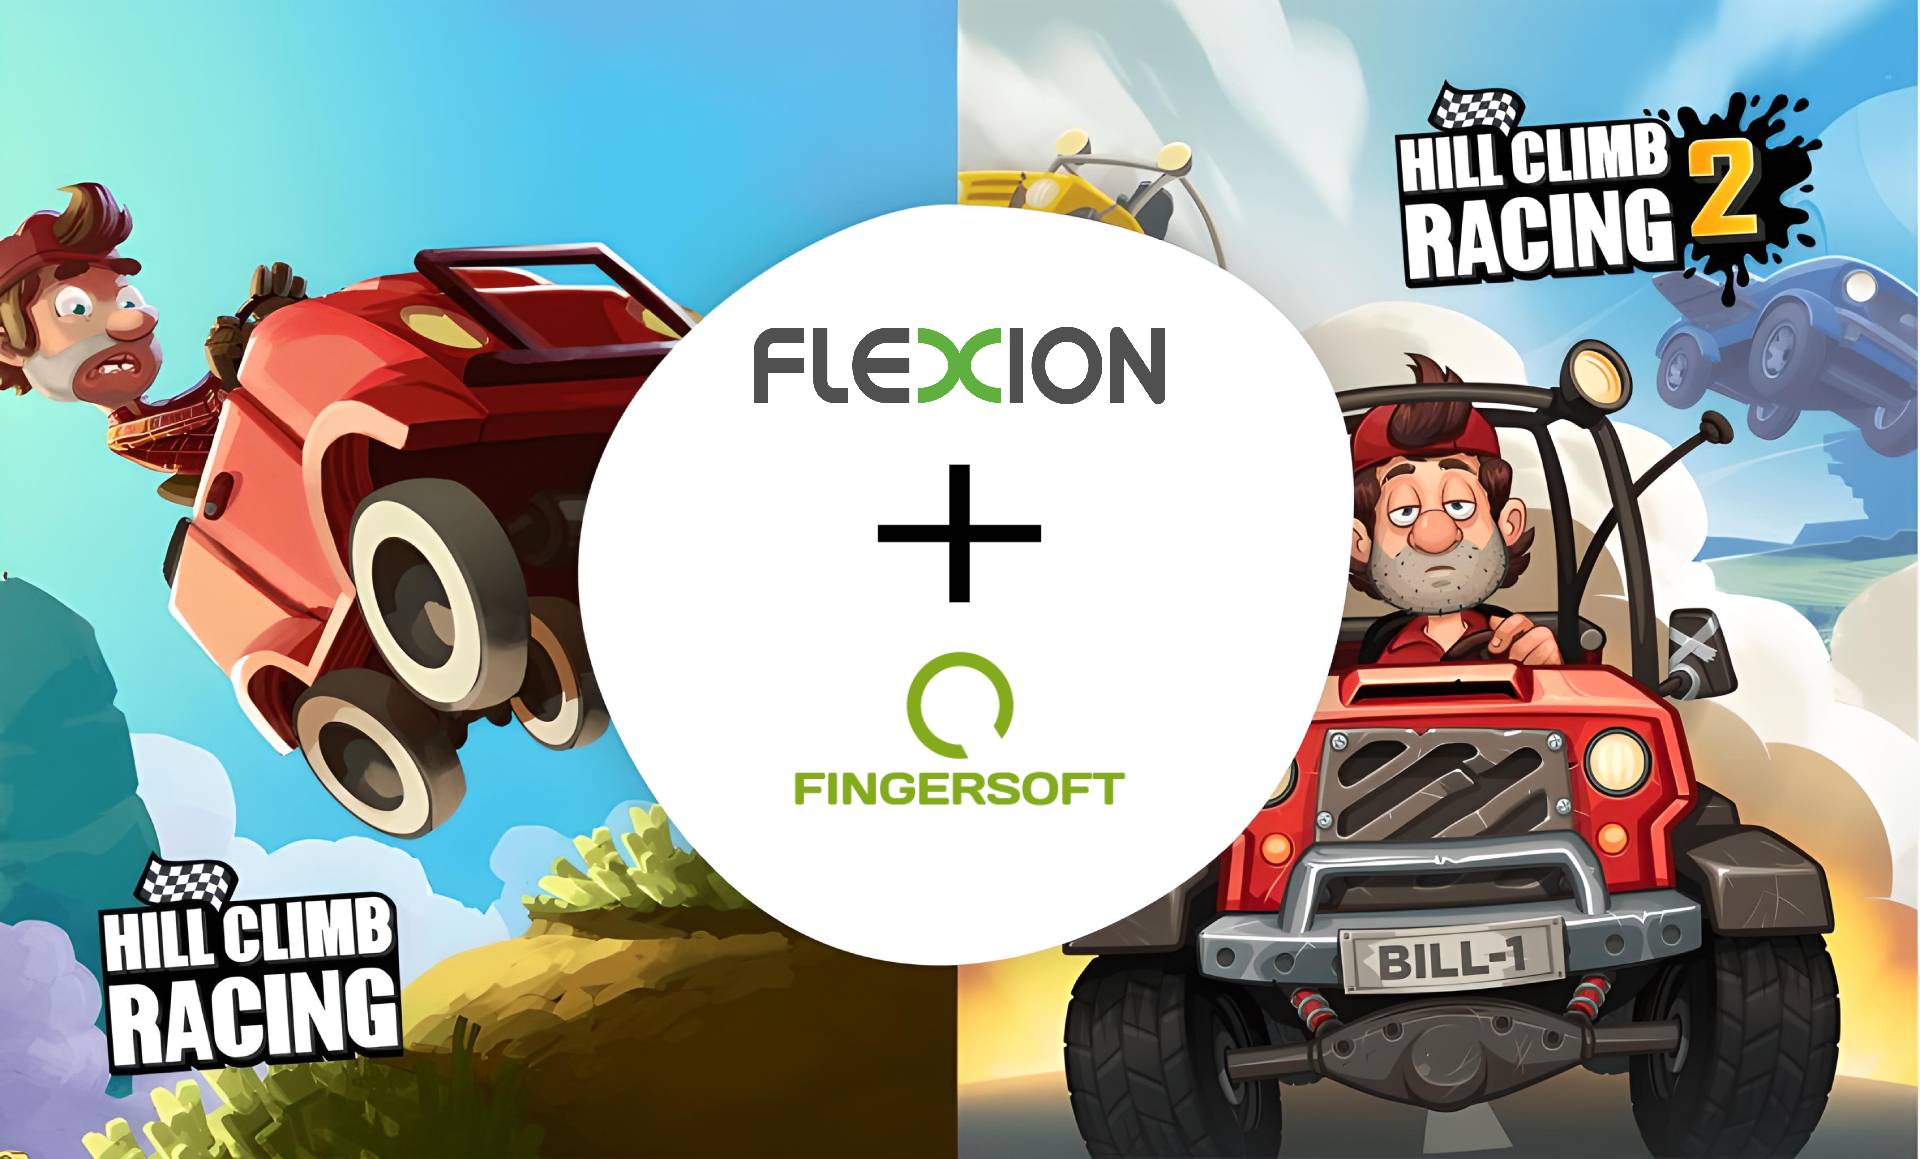 Flexion has partnered with Fingersoft